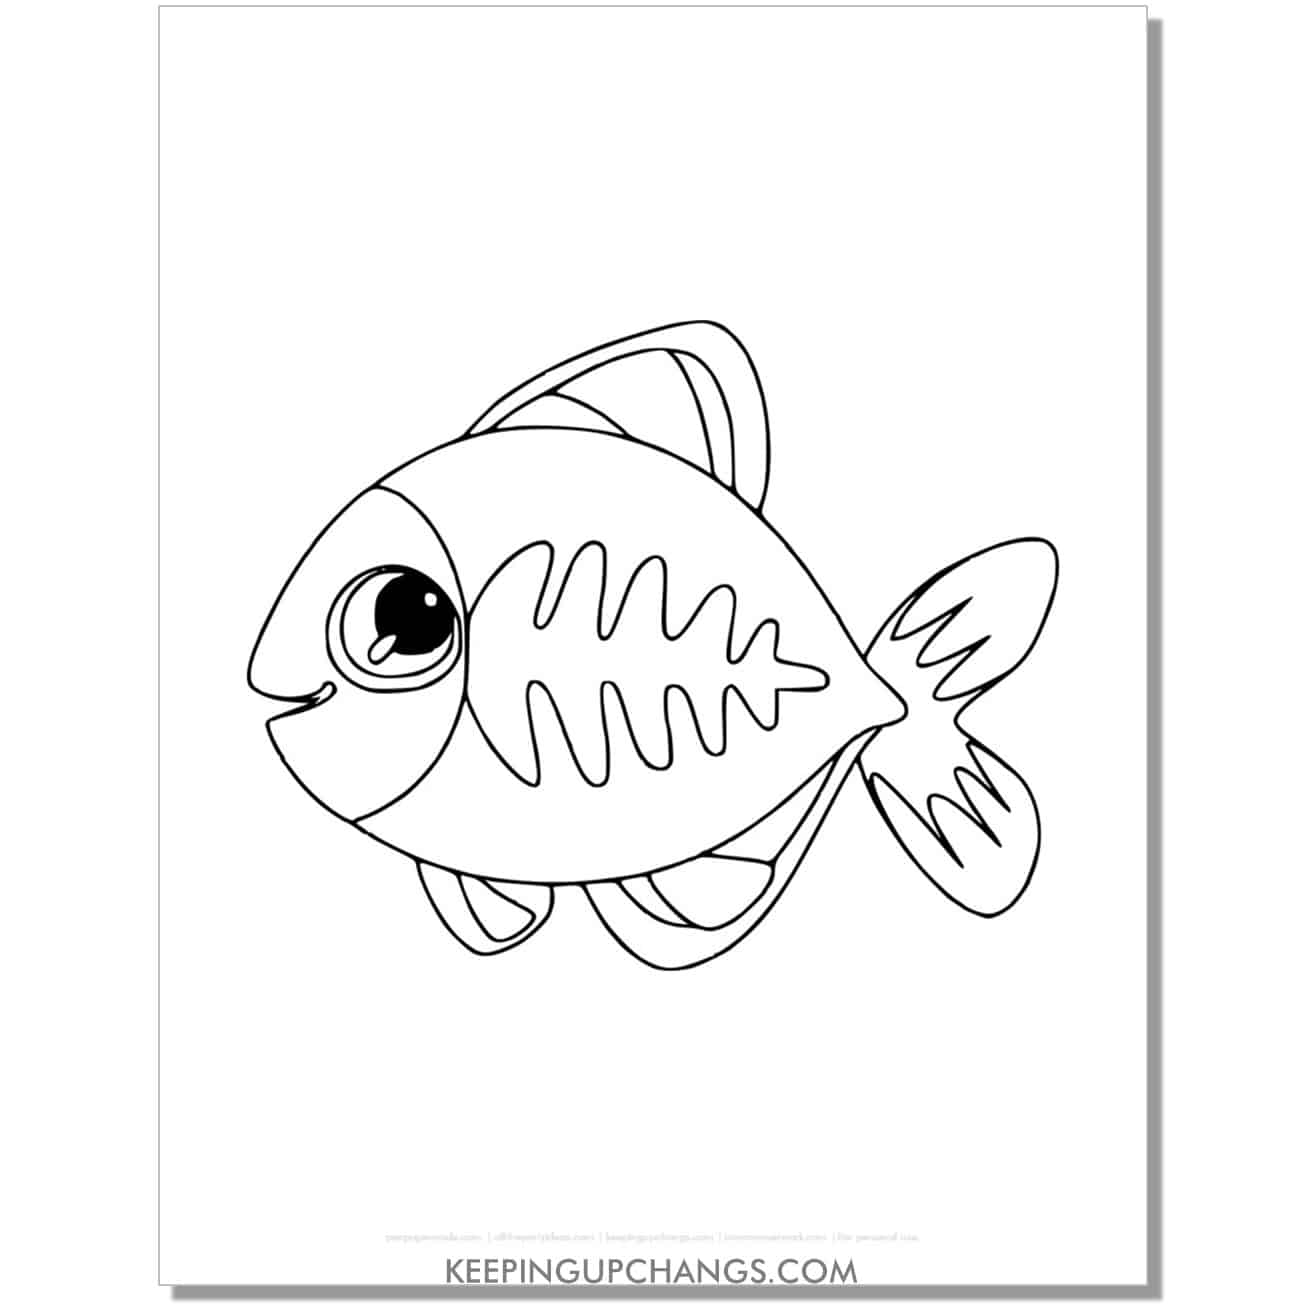 simple x ray fish outline coloring page, sheet.